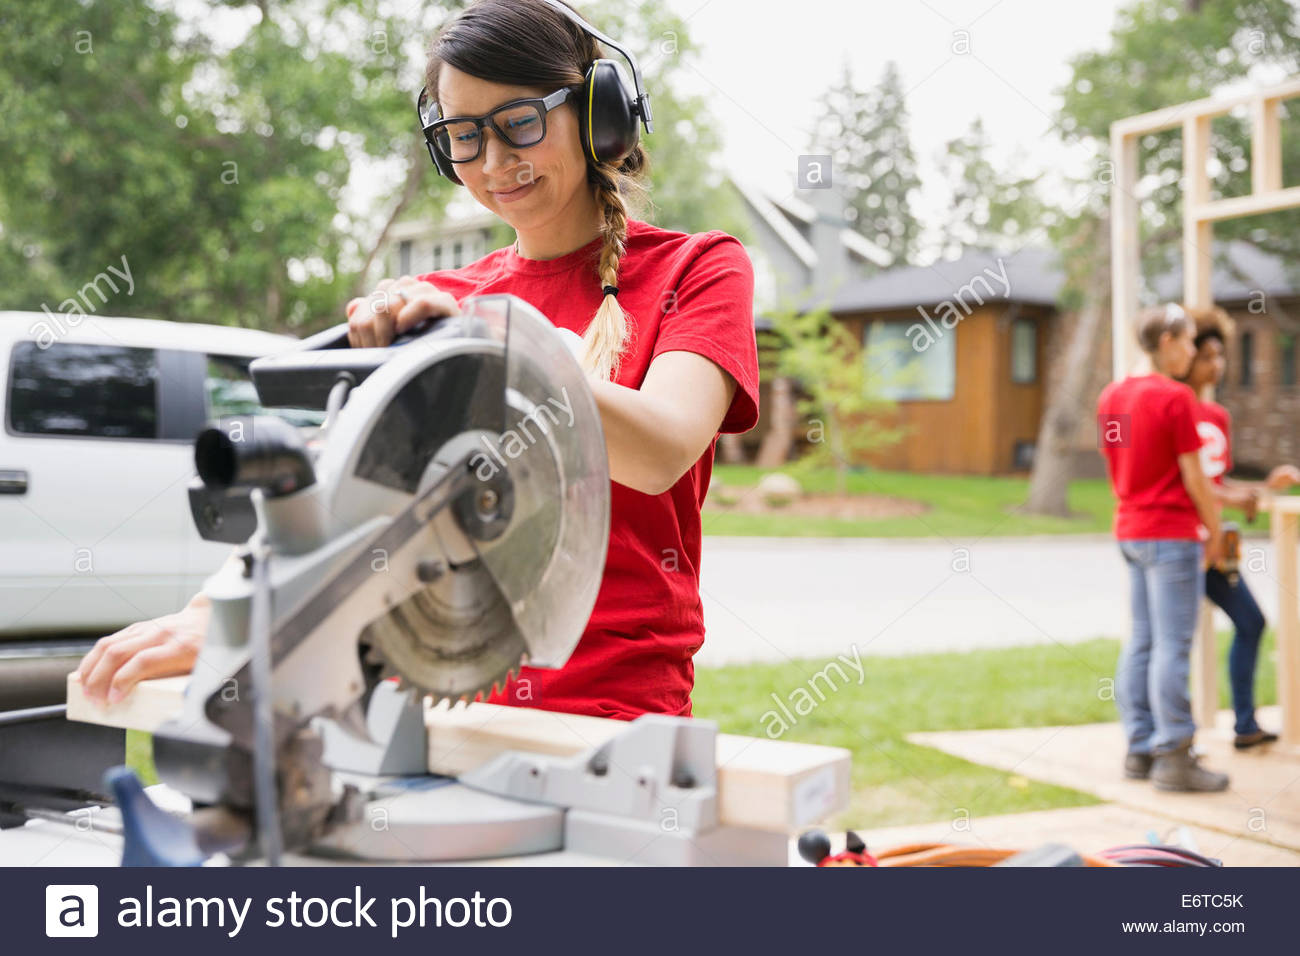 Volunteer using table saw near construction frame Stock Photo